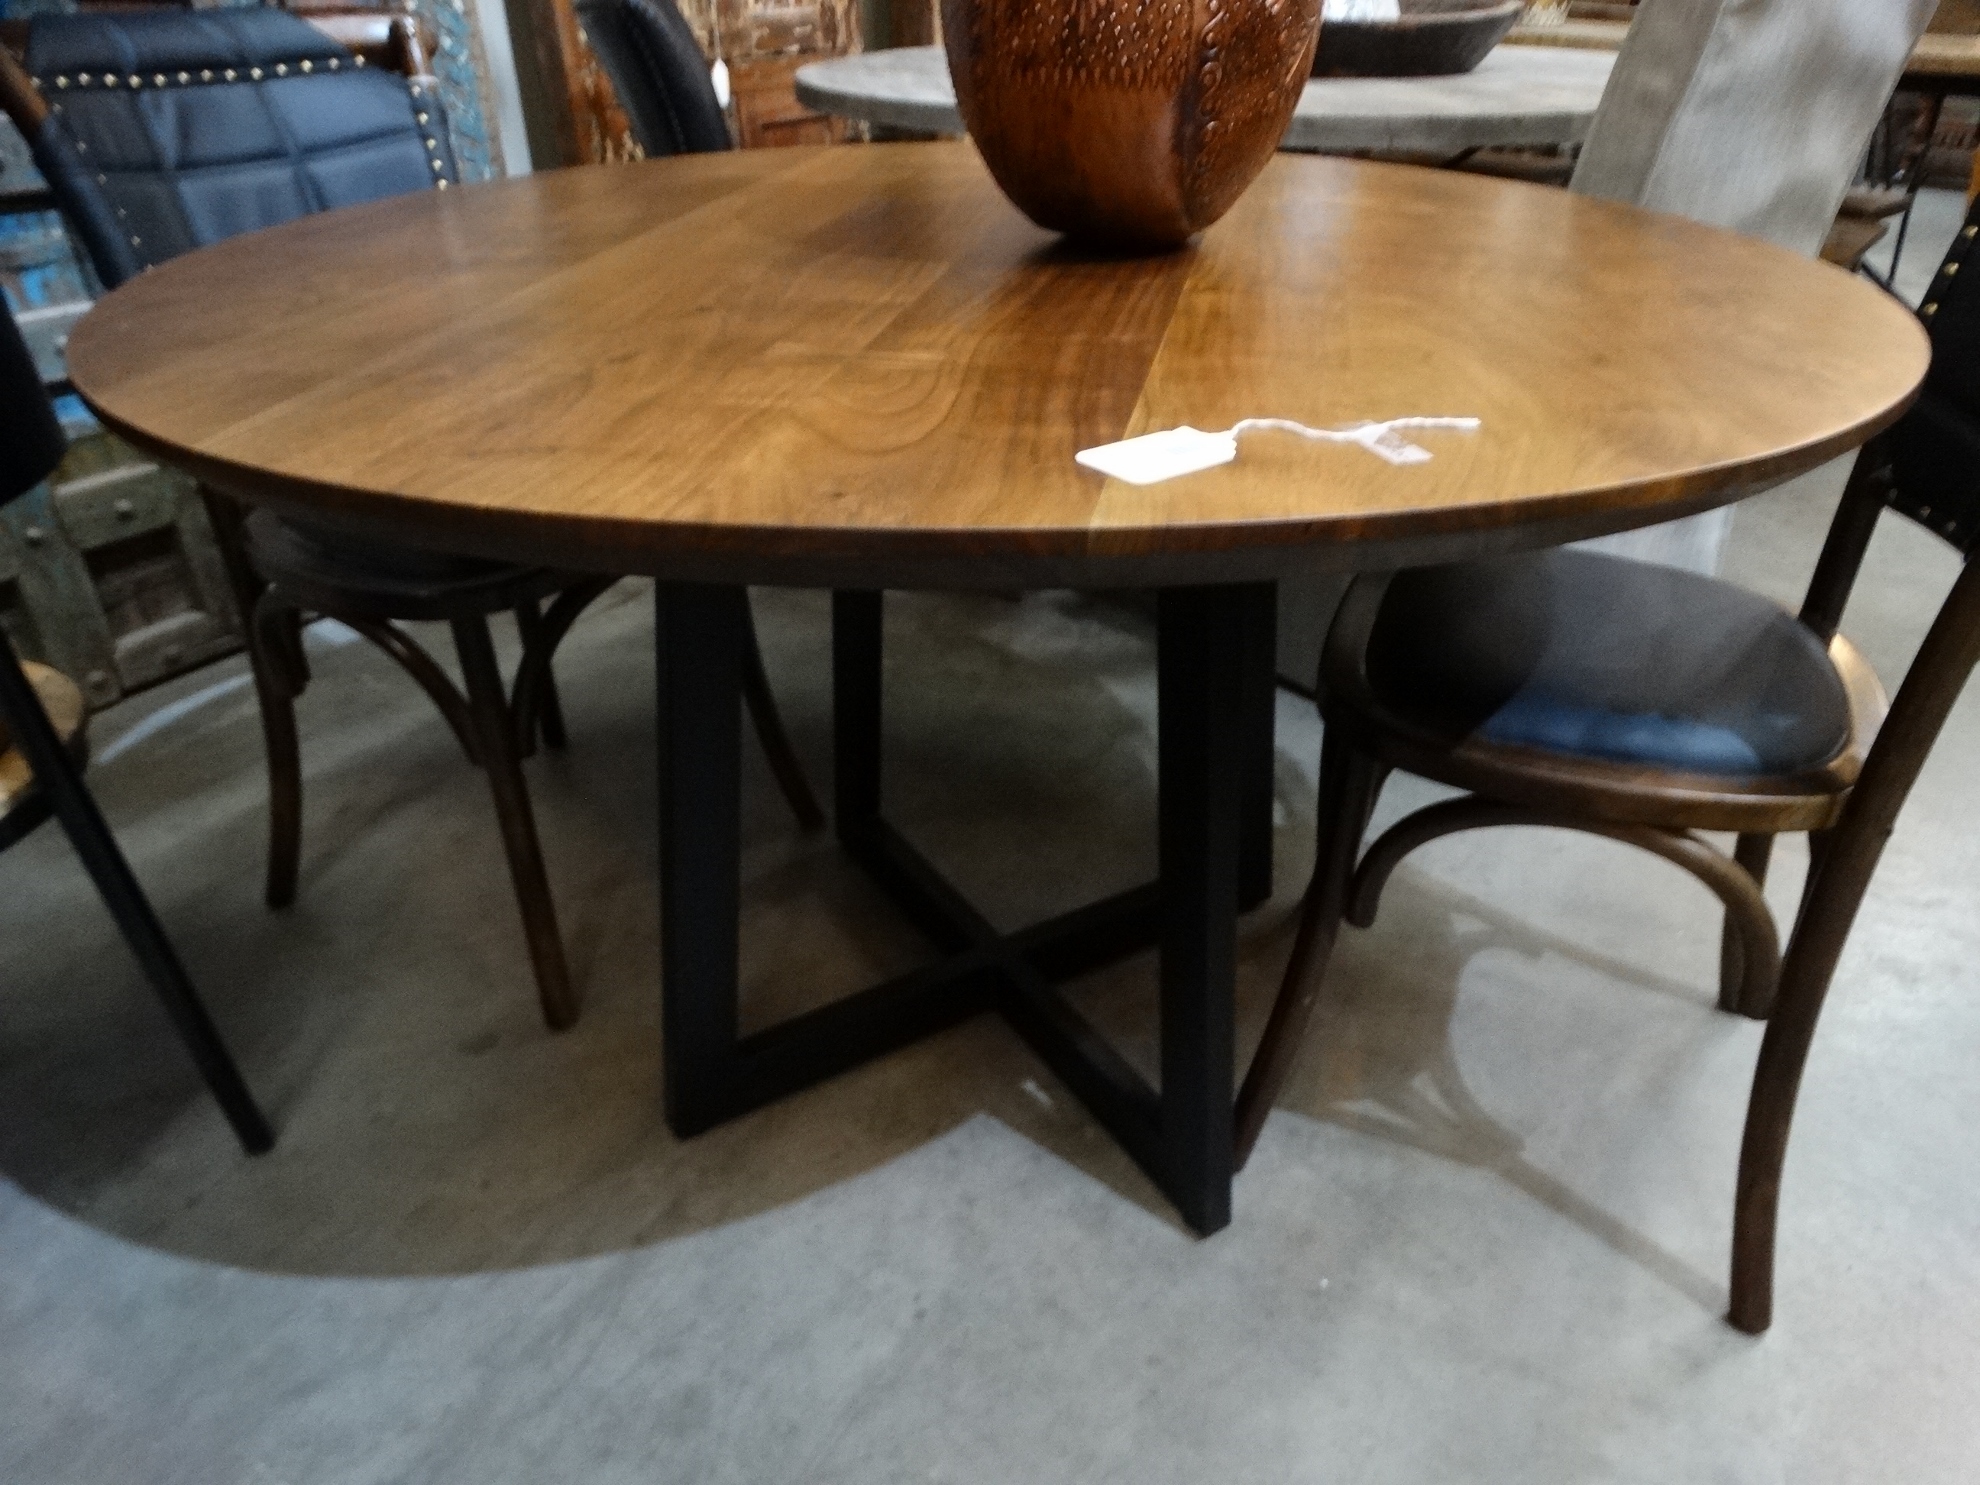 Black and brown round dining table Modern Wooden Dining Round Tablethis Farmhouse Table Has A Rich Brown Finish The Black Metal Base Contrasts Nicely The Black Iron Base Give It Industrial Appeal